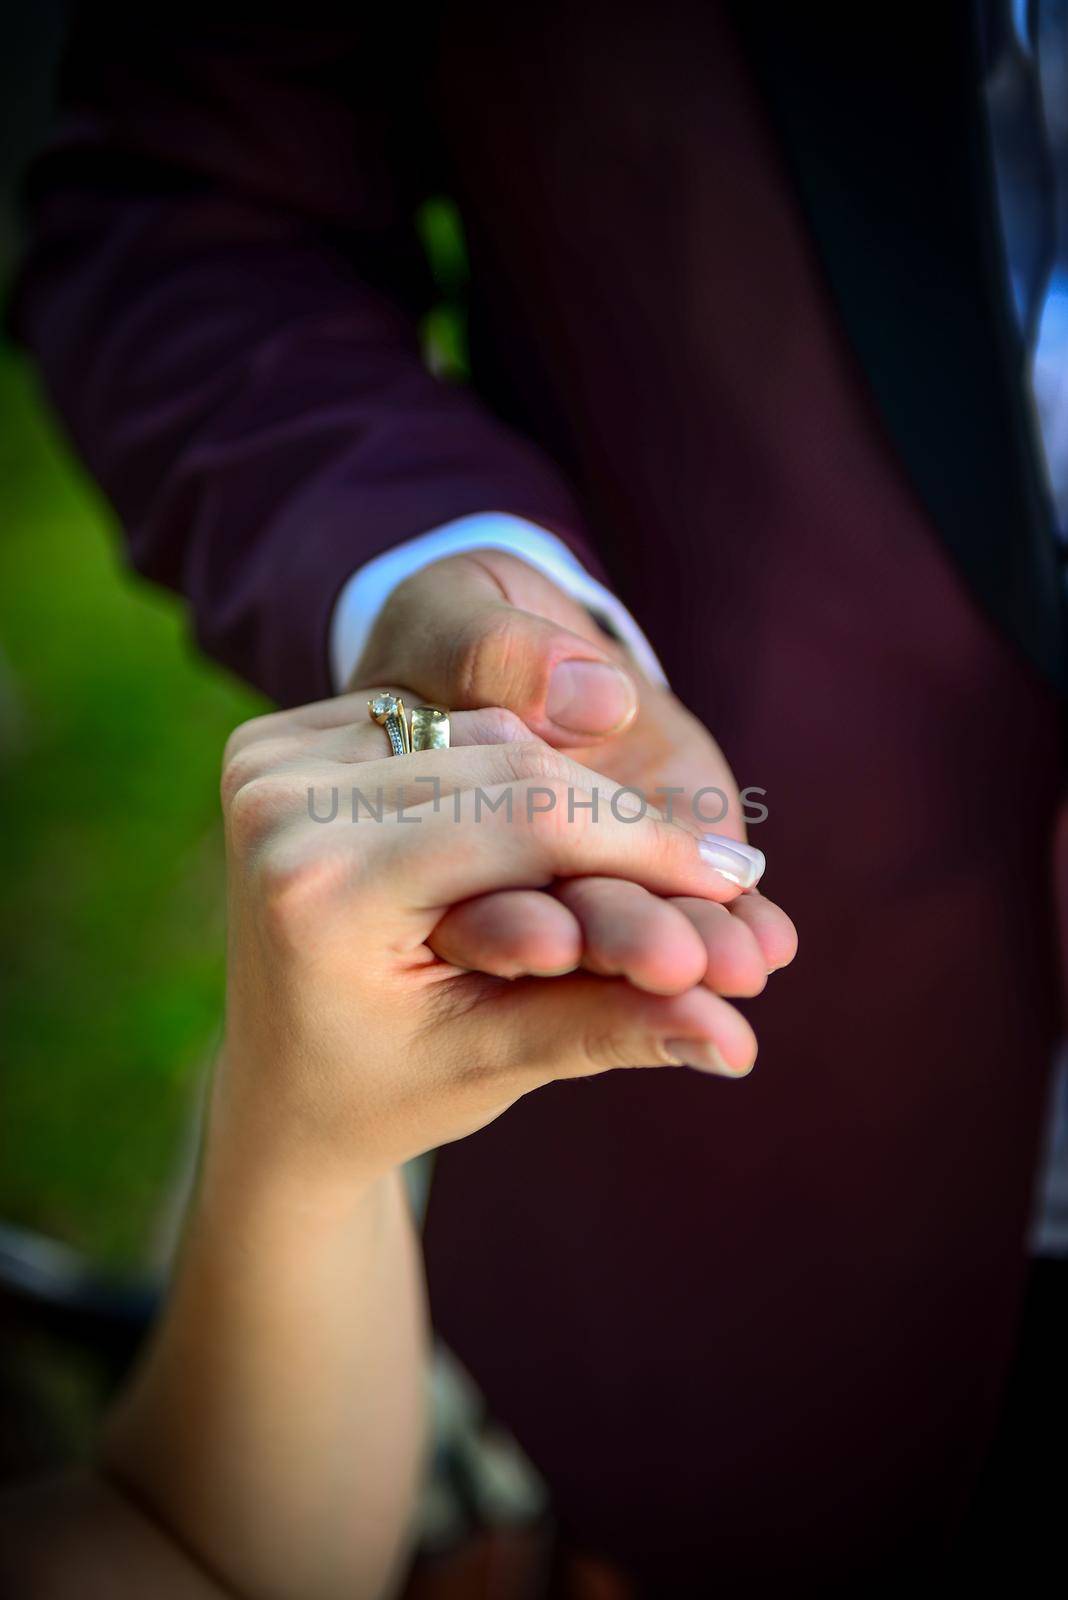 Bride and groom holding hands with engagement rings on their fingers close up view wedding shoot concept